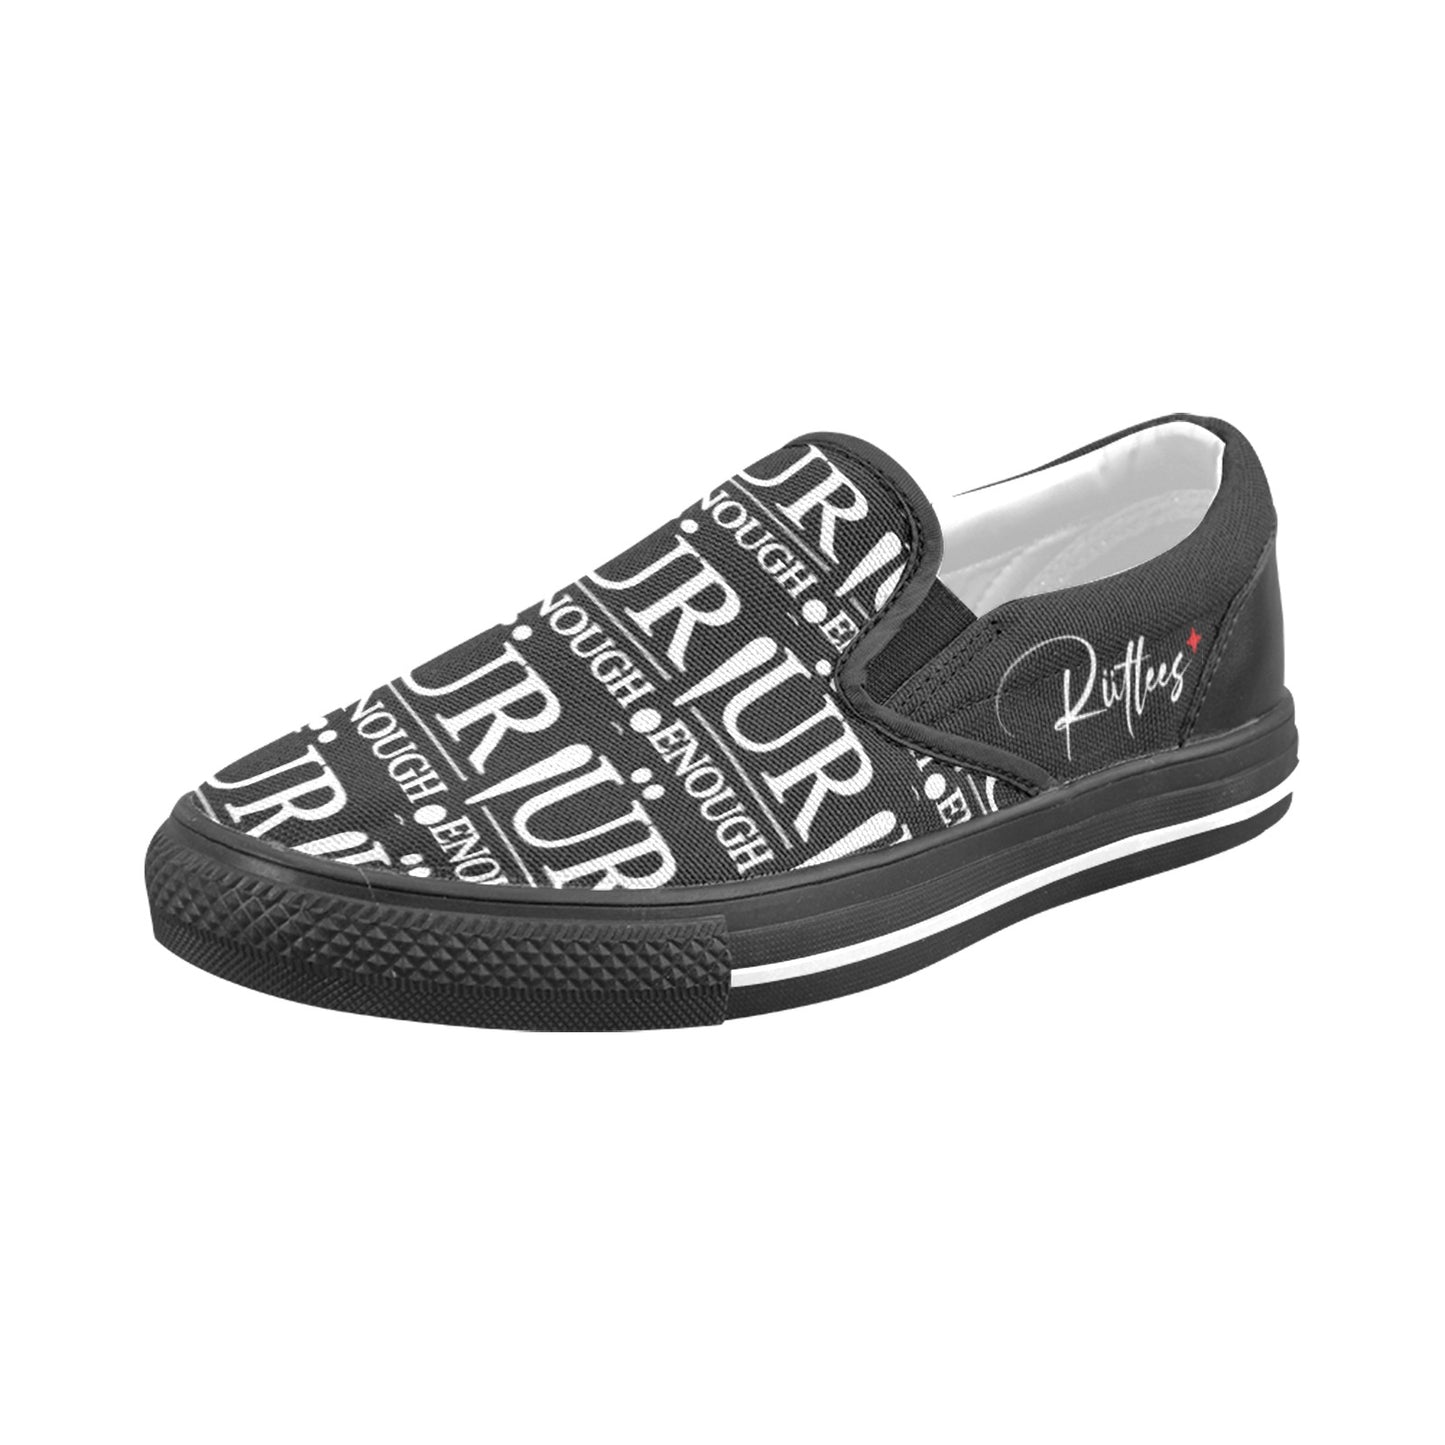 You Are Enough Men's Slip-On Canvas Shoes